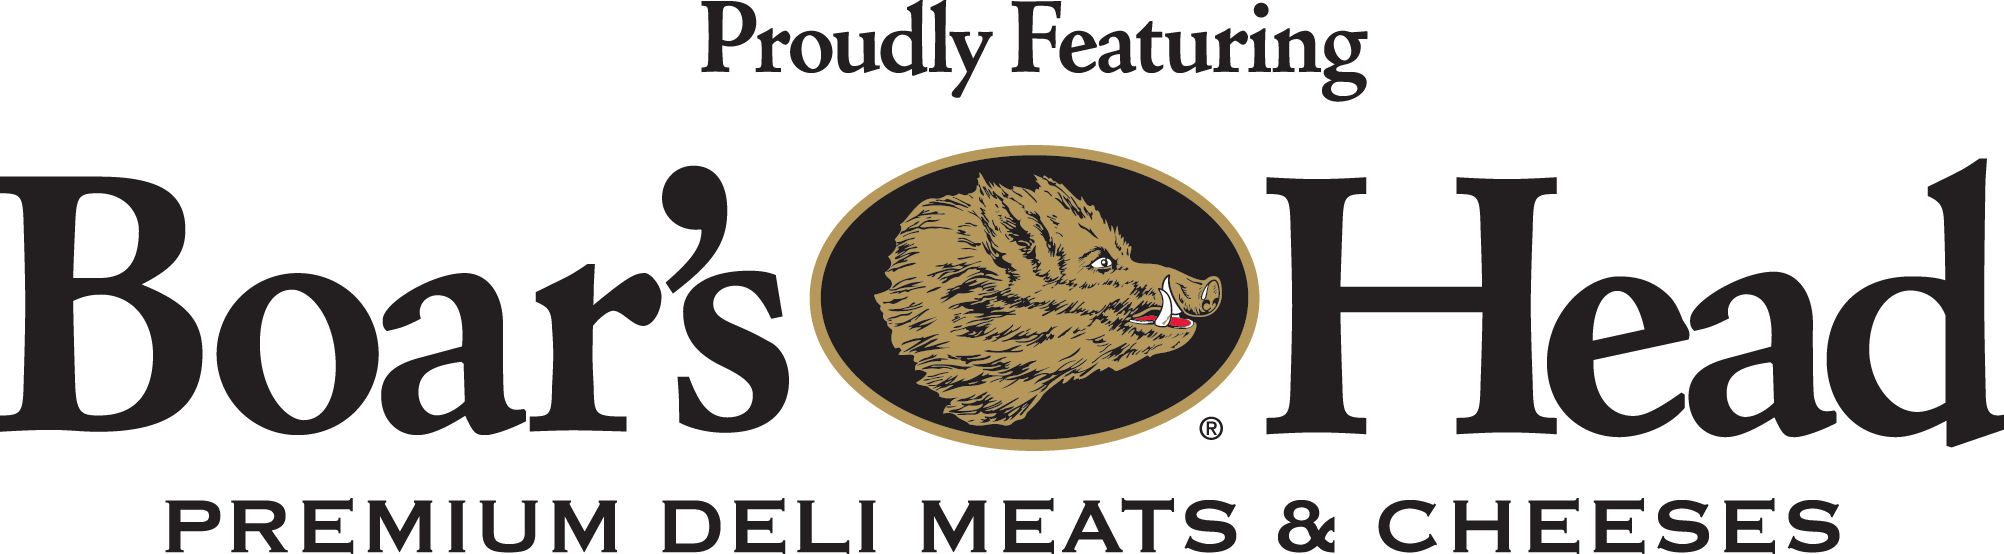 Boars Head Meats & Cheeses